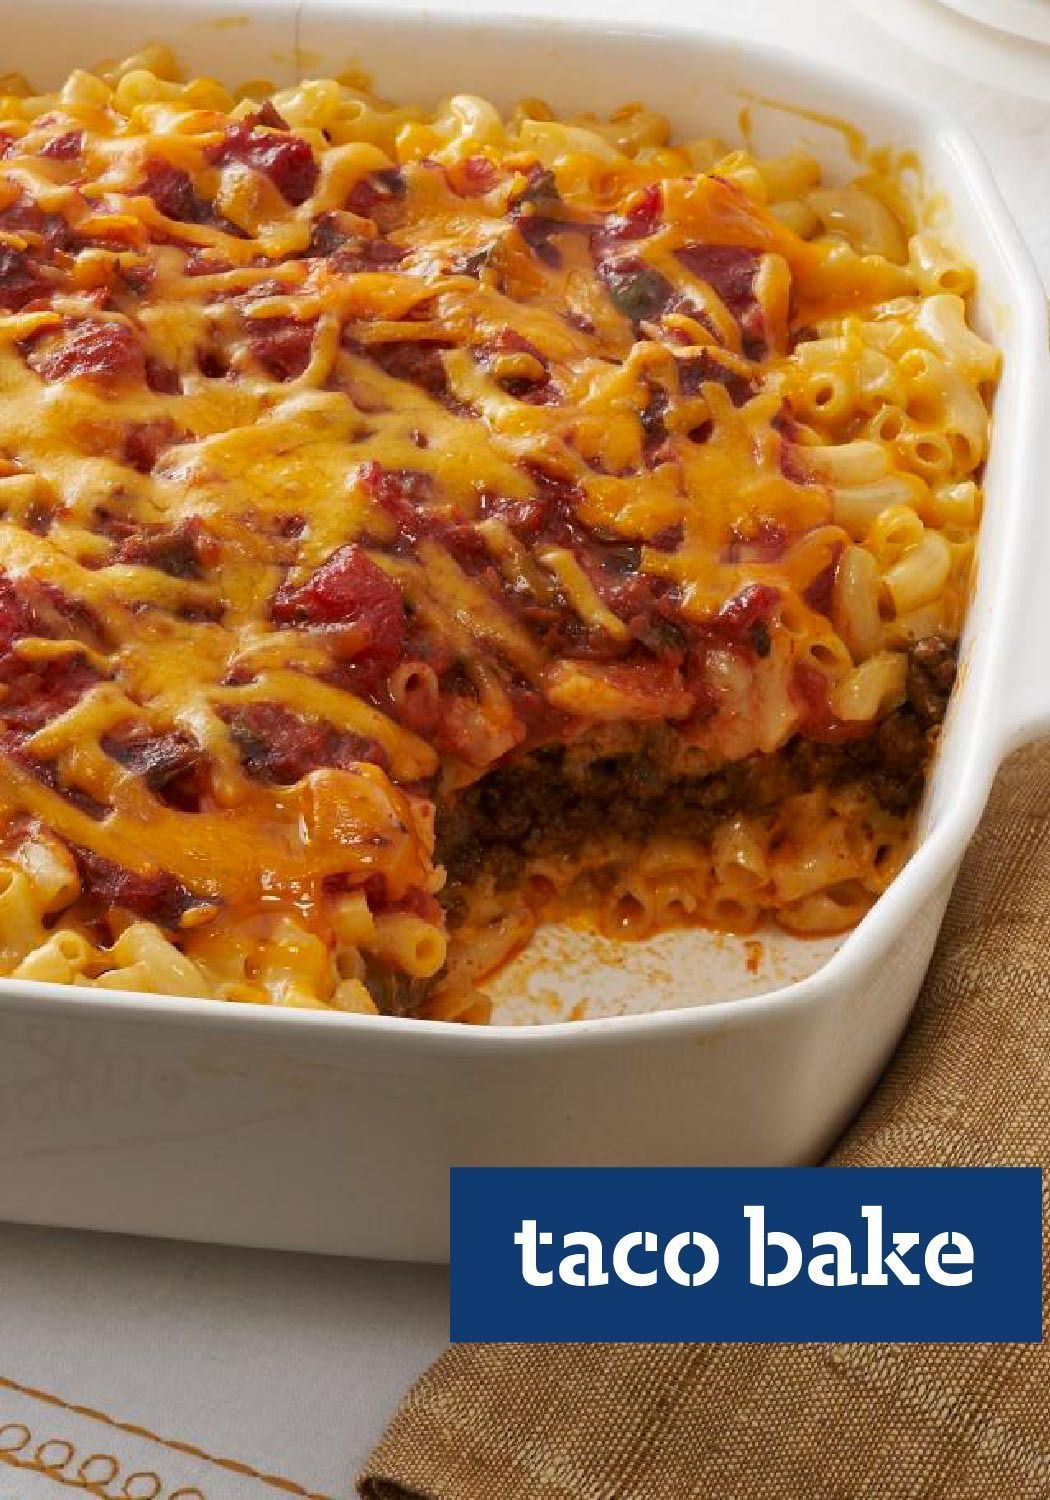 Taco Bake – We had a hunch about these two. And sure enough, fireworks. Ooey-gooey mac and cheese pairs up with the Tex-Mex